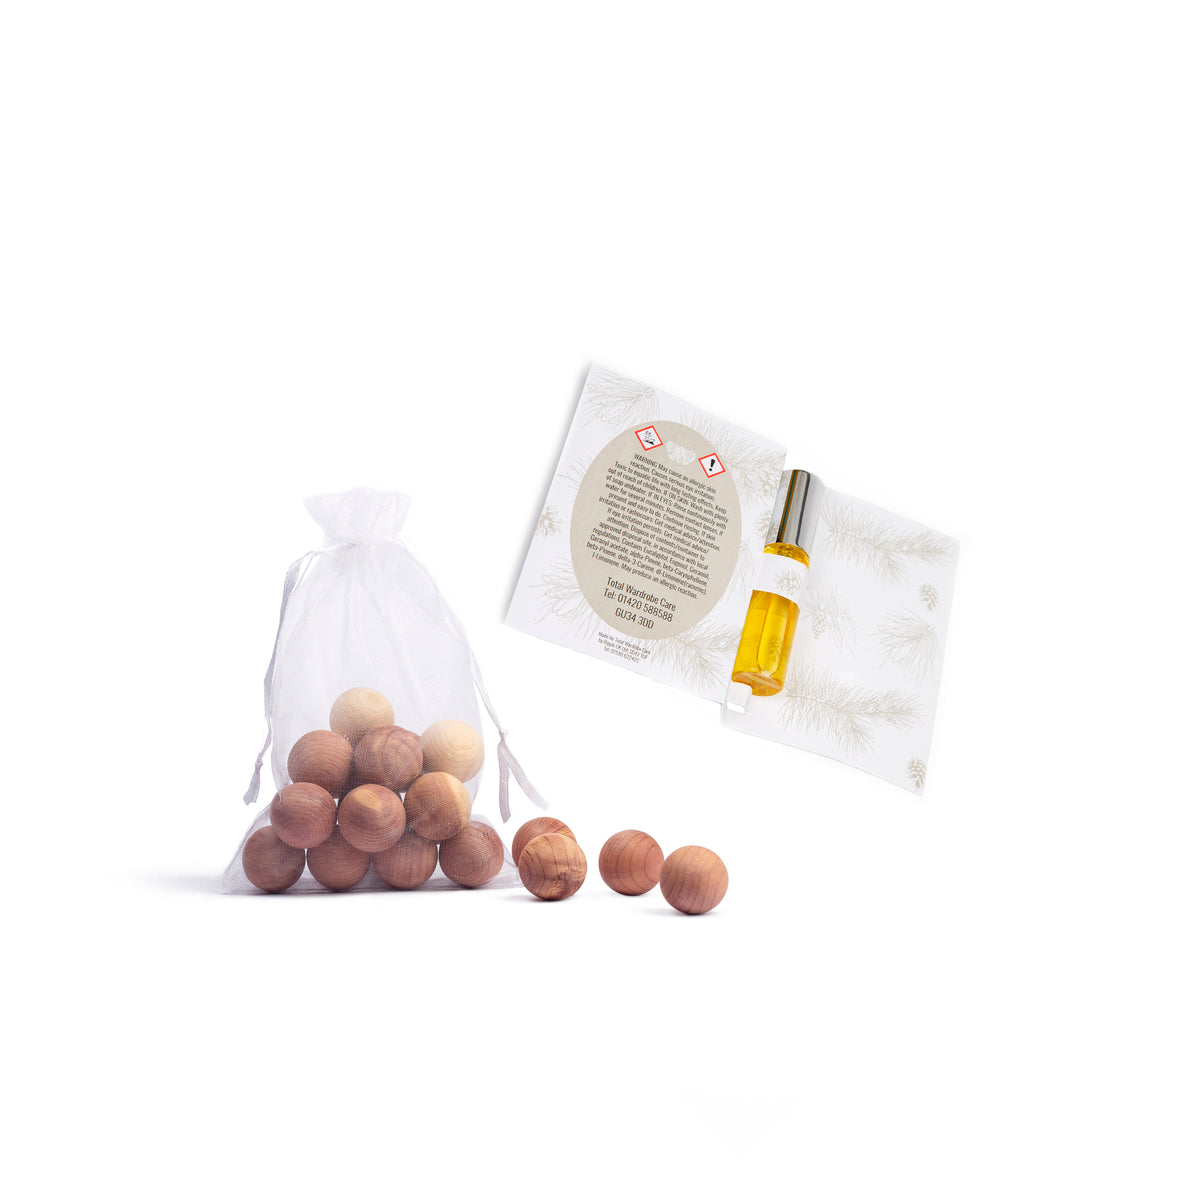 Closed organza bag with cedarwood balls inside and open packaging with refresher spray to centre